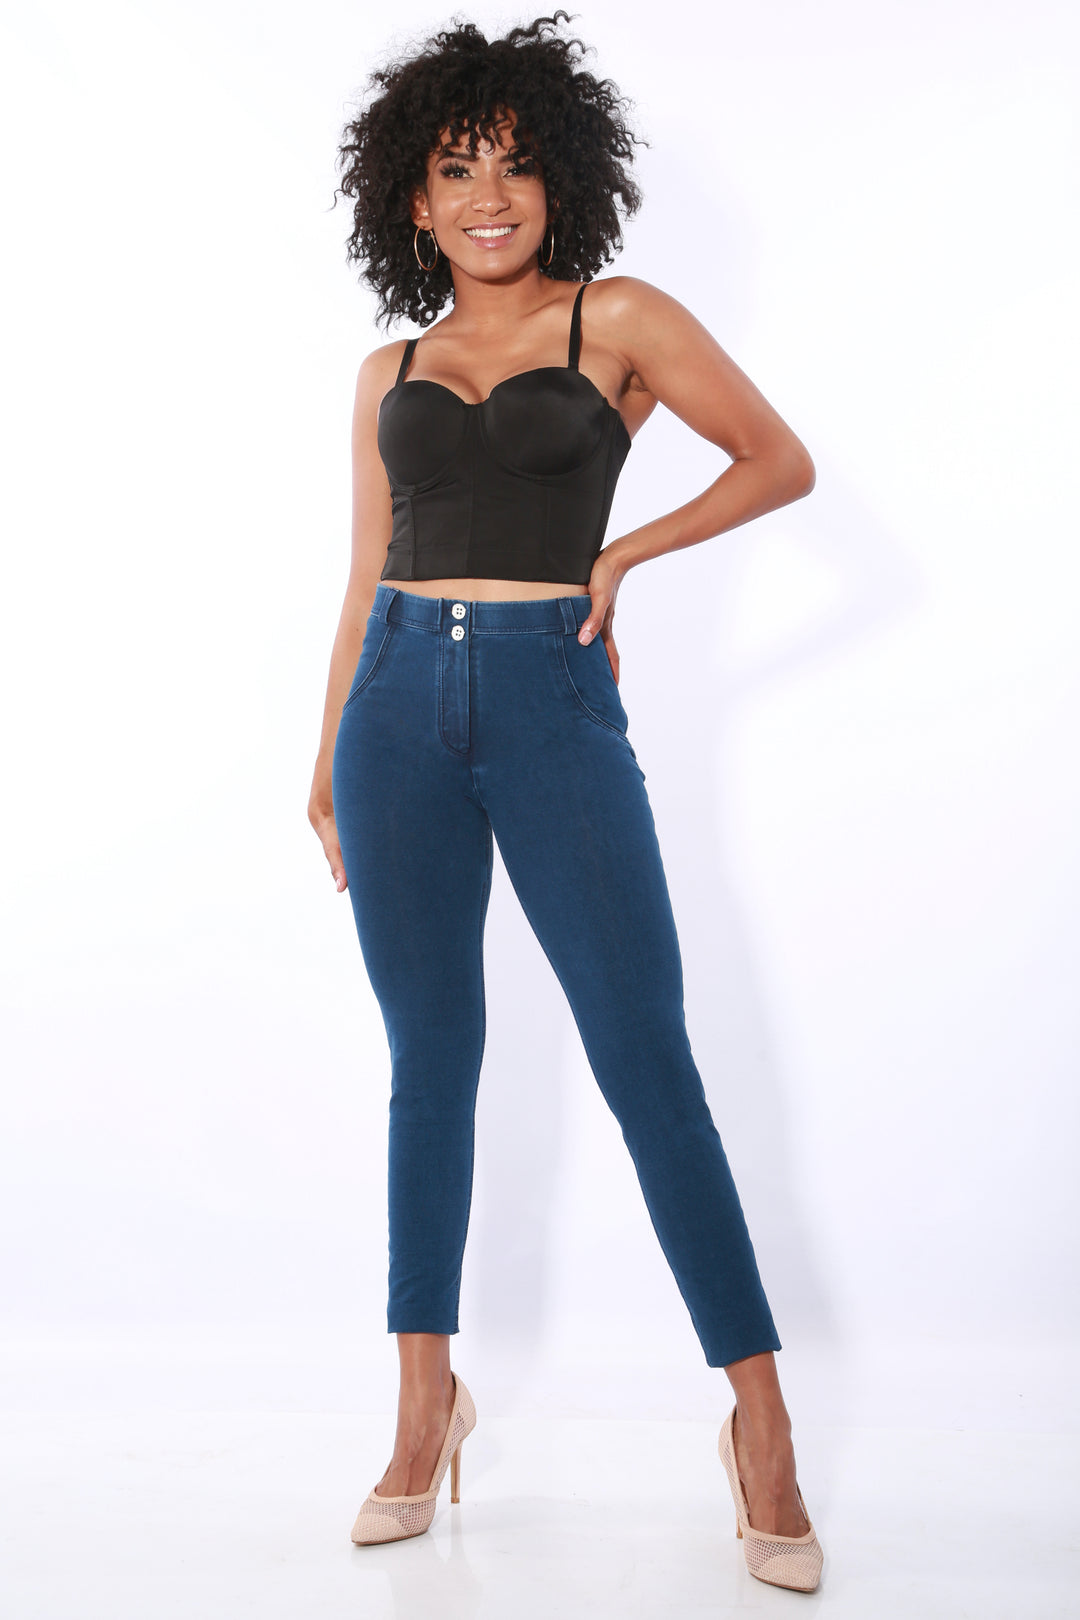 Mid waist Jeans/Jeggings pants Butt lifting Shaping - Black stone